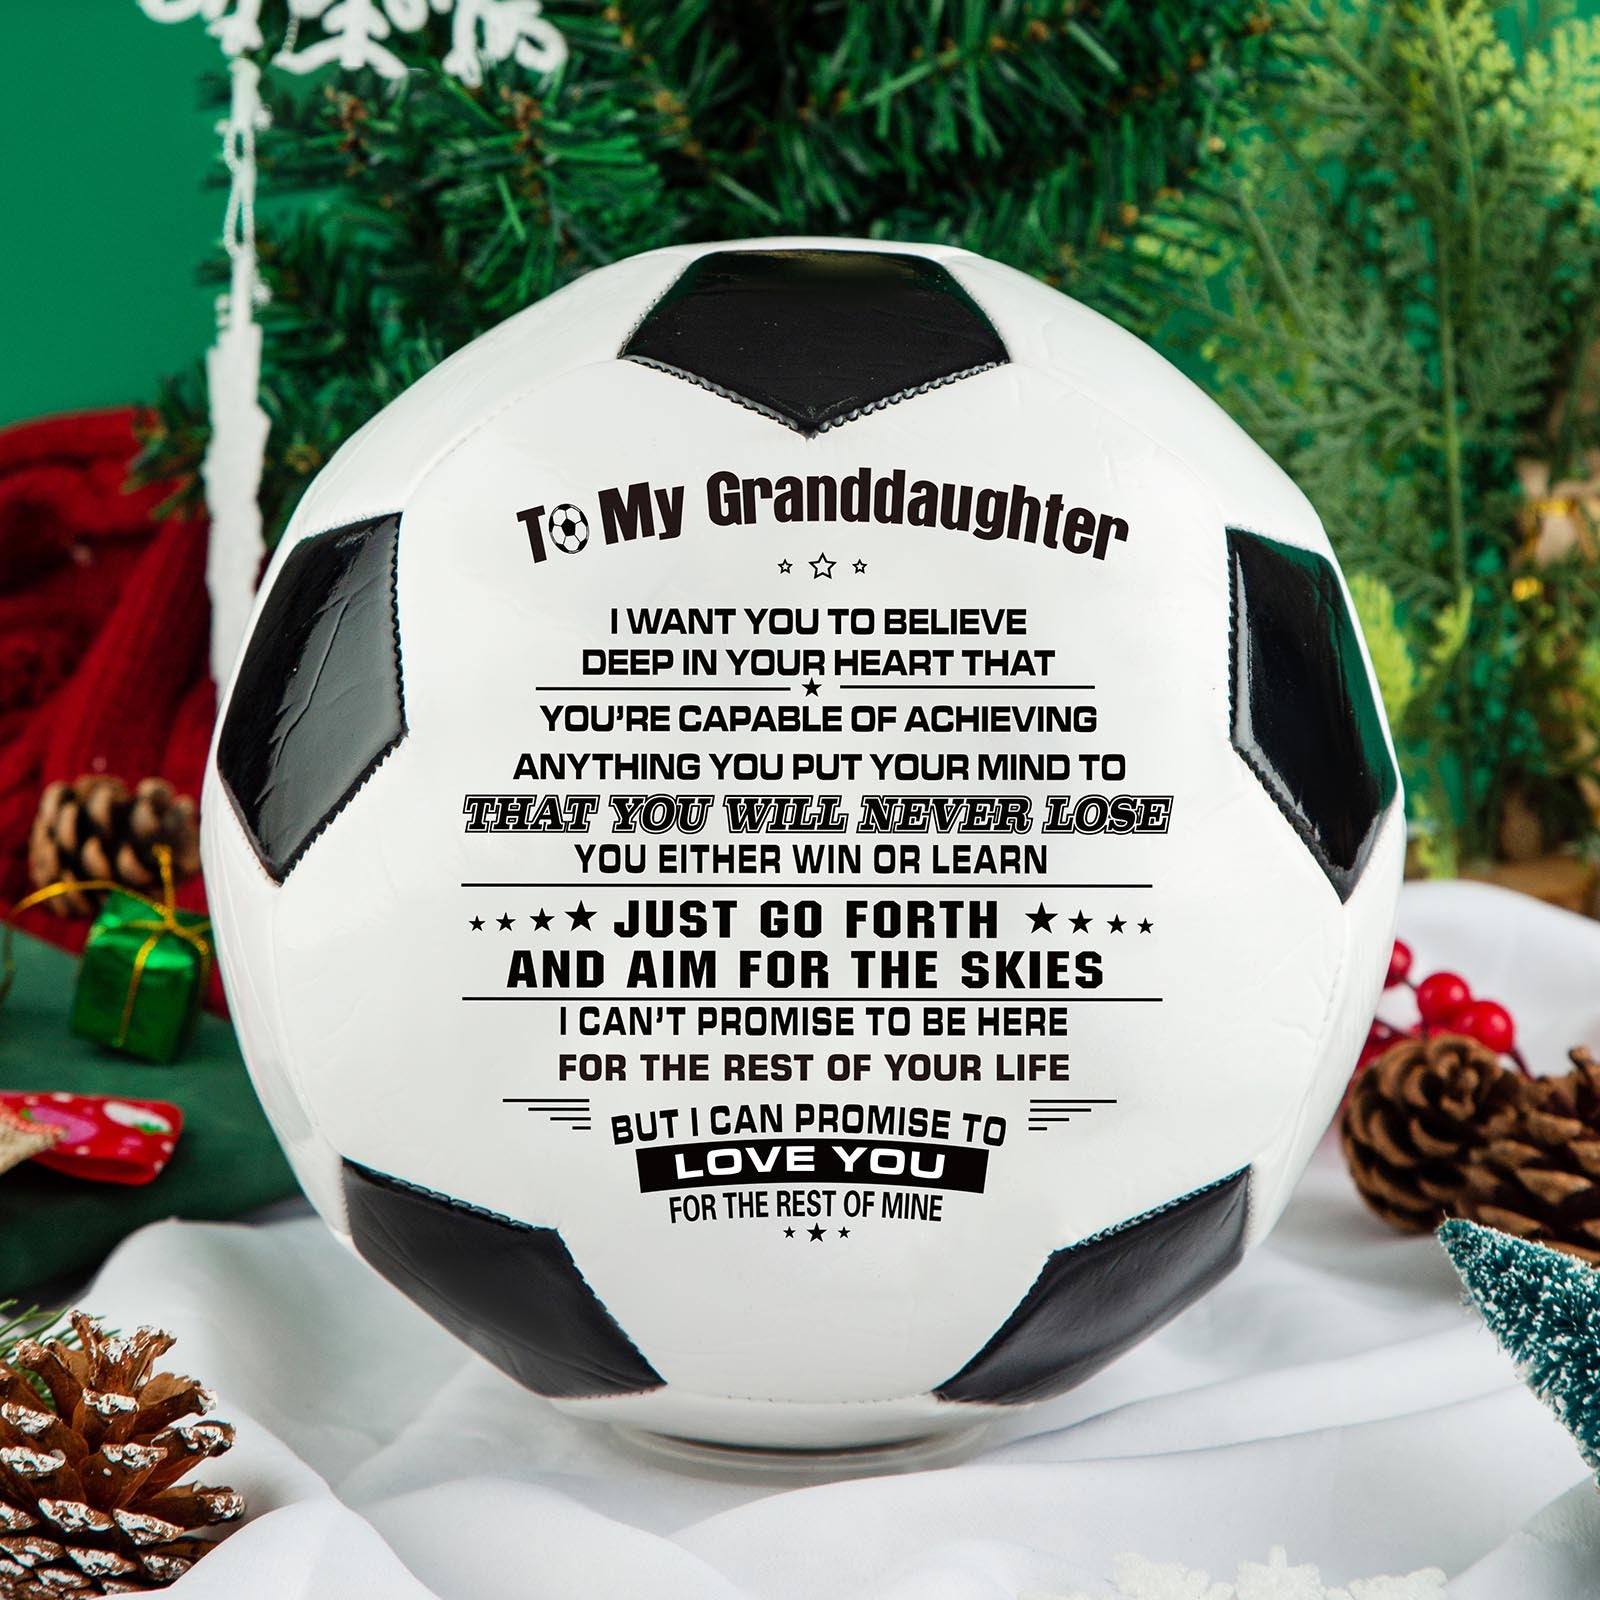 Personalized Printed Soccer Ball Football For My Granddaughter, Birthday Christmas Graduation Gift For Granddaughter, Perfect For Outdoor & Indoor Match Or Game，Size 5